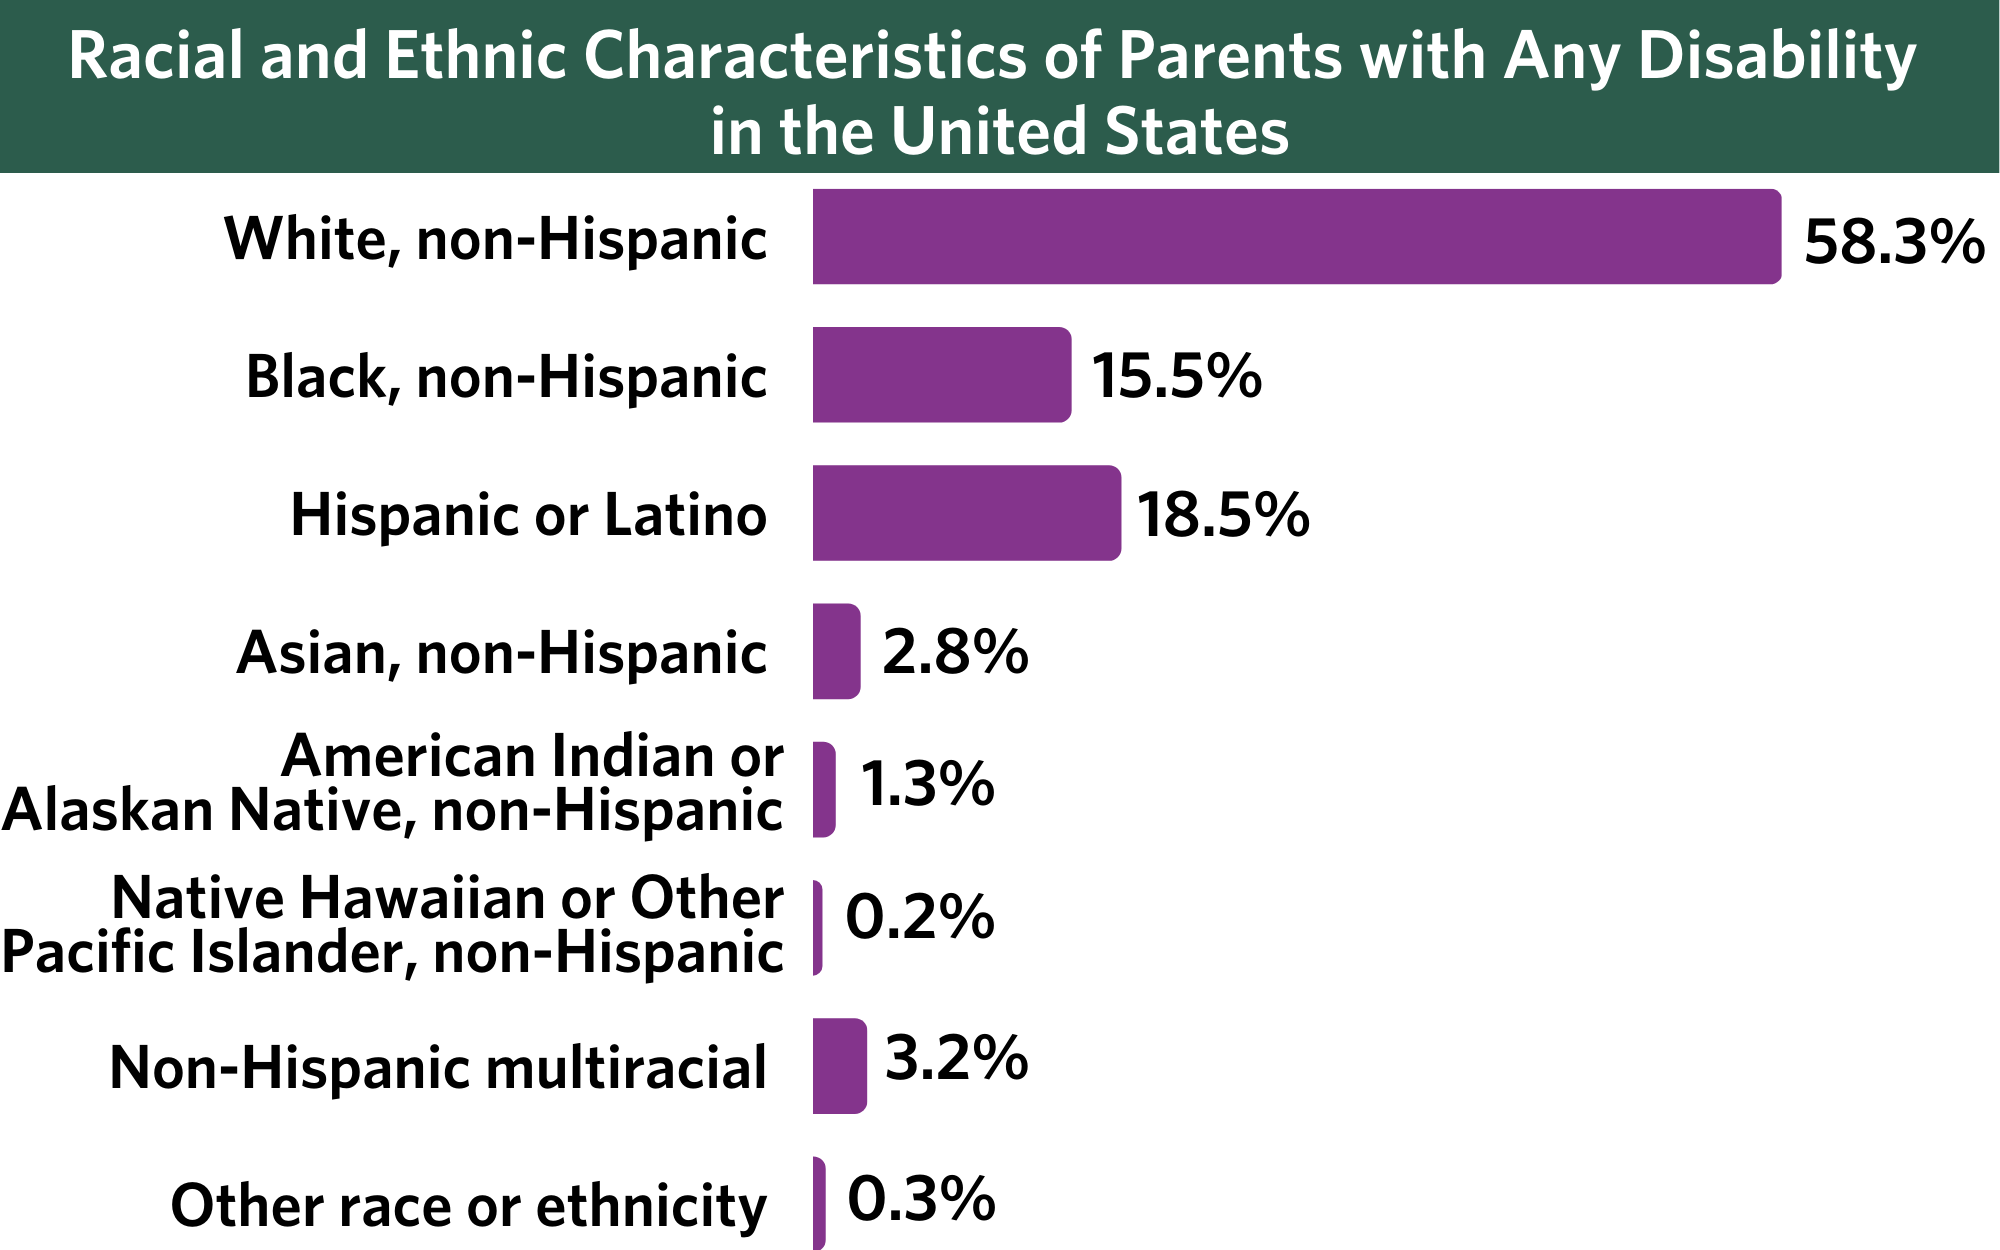 Racial and Ethnic Characteristics of People with Disabilities in the United States